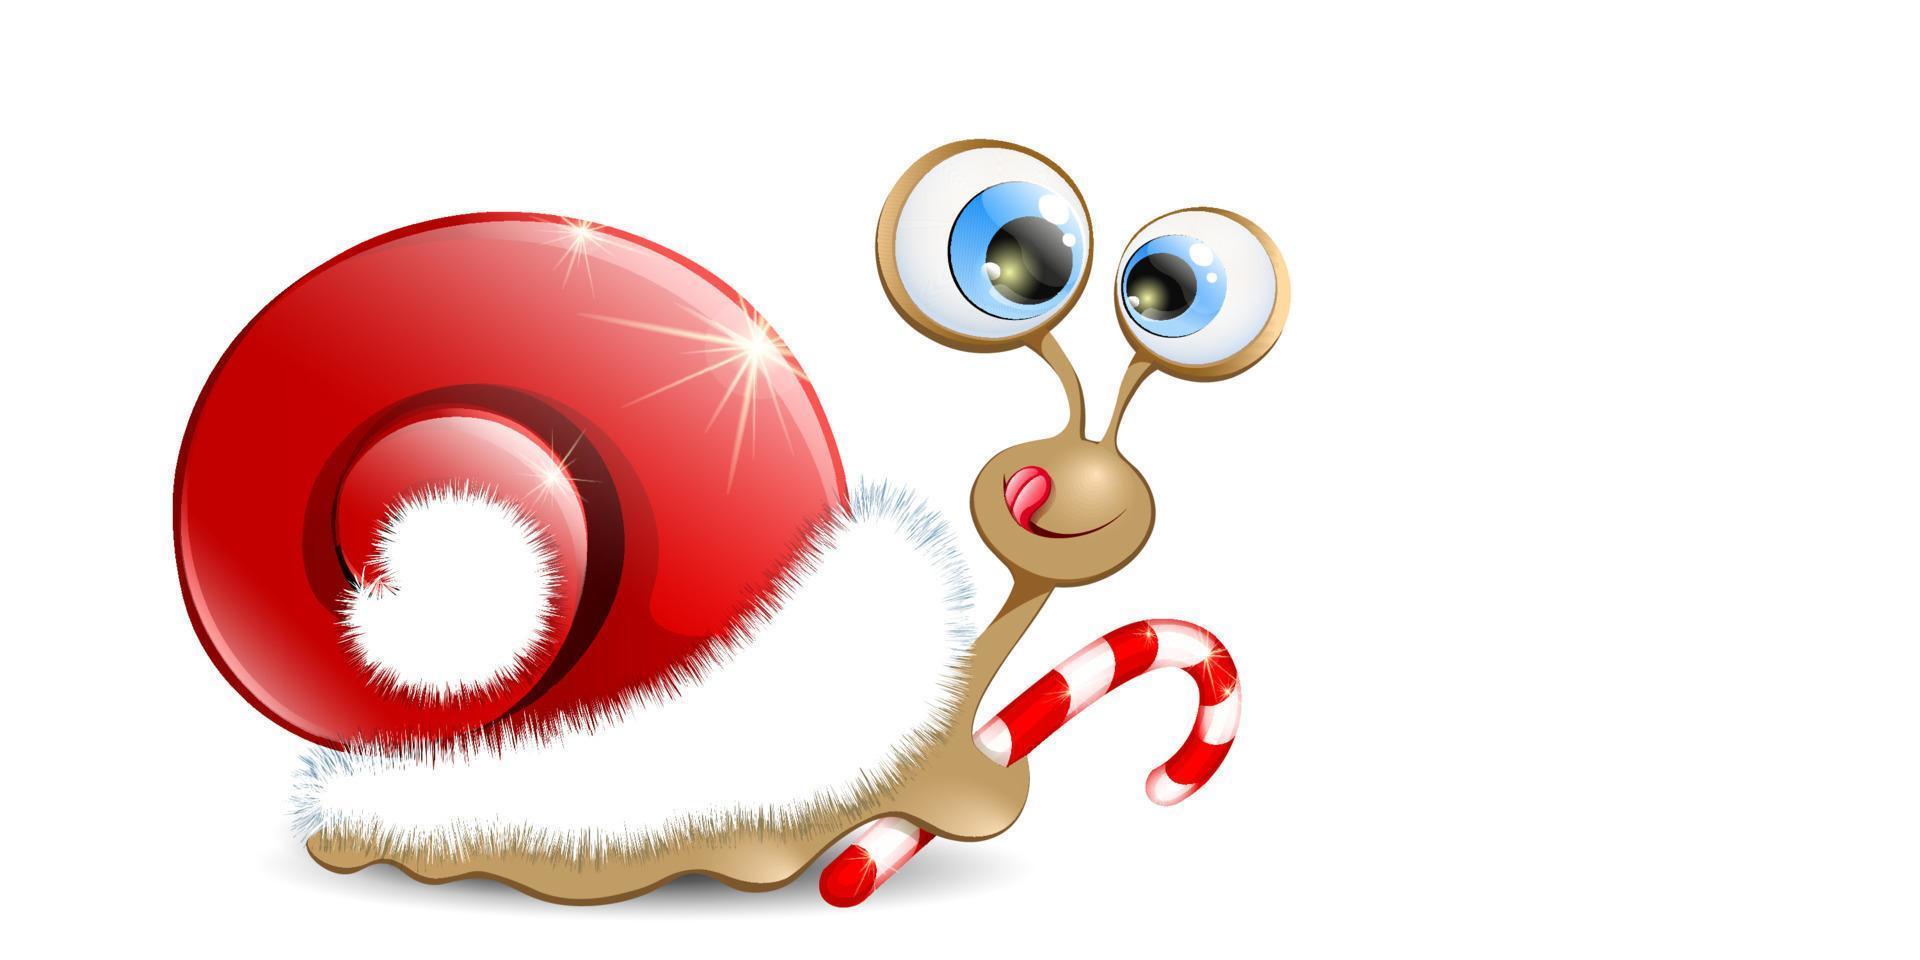 Funny cartoon Christmas Snail with Santa hat shell, licking lips and holding candy cane vector